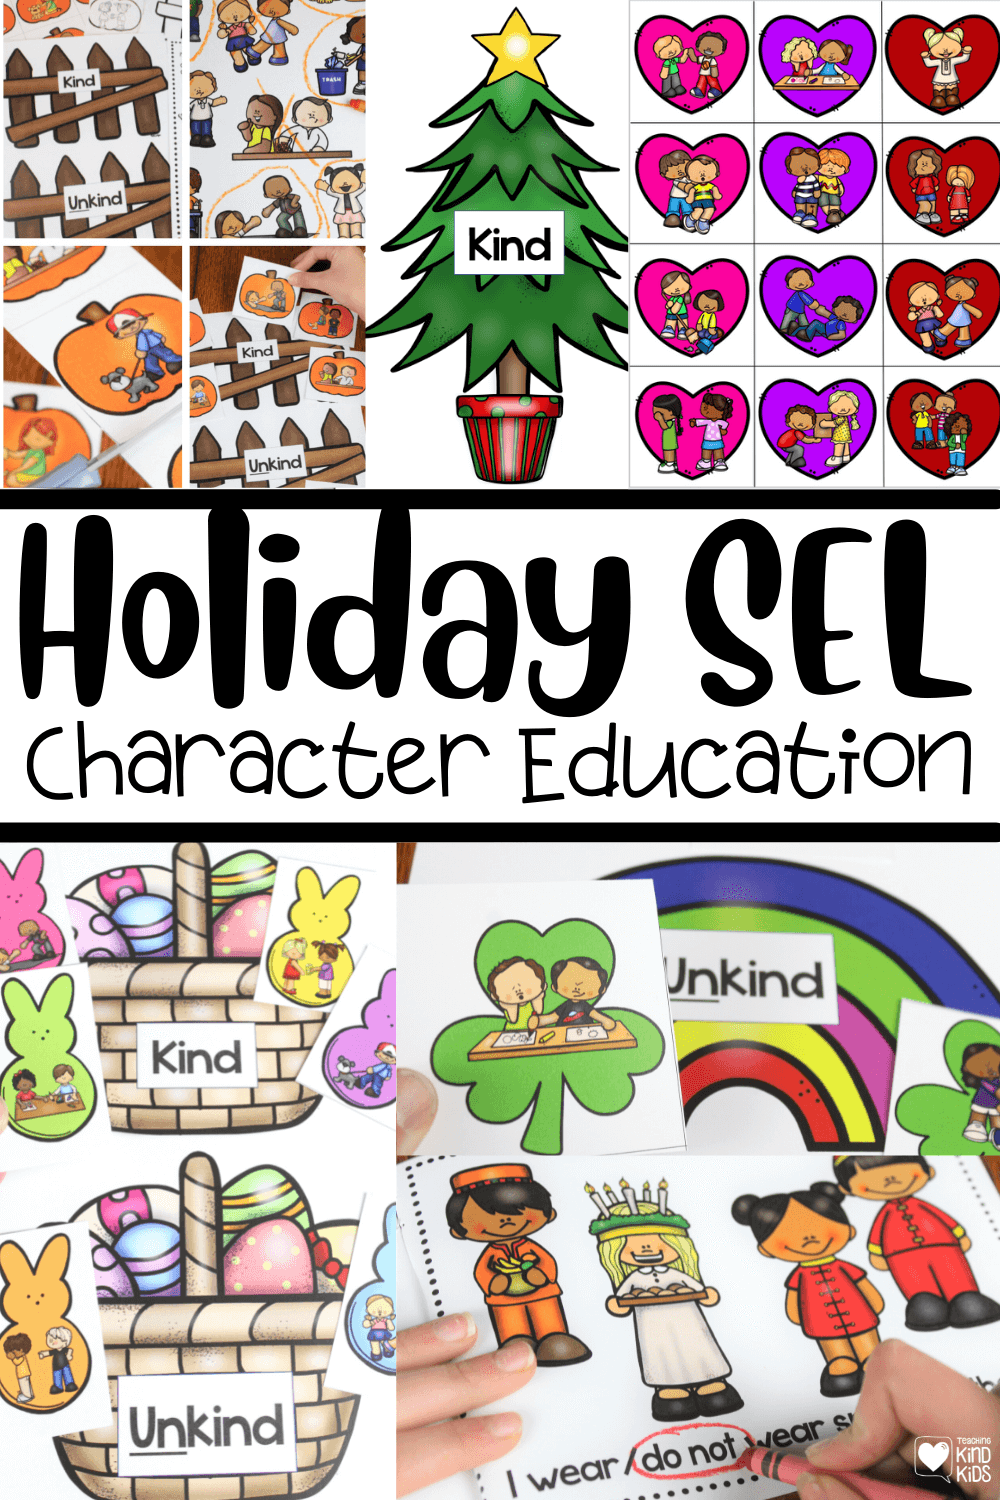 Use this holiday sel bundle to teach sel and character education to students in fun, hands-on ways for all the major holidays.